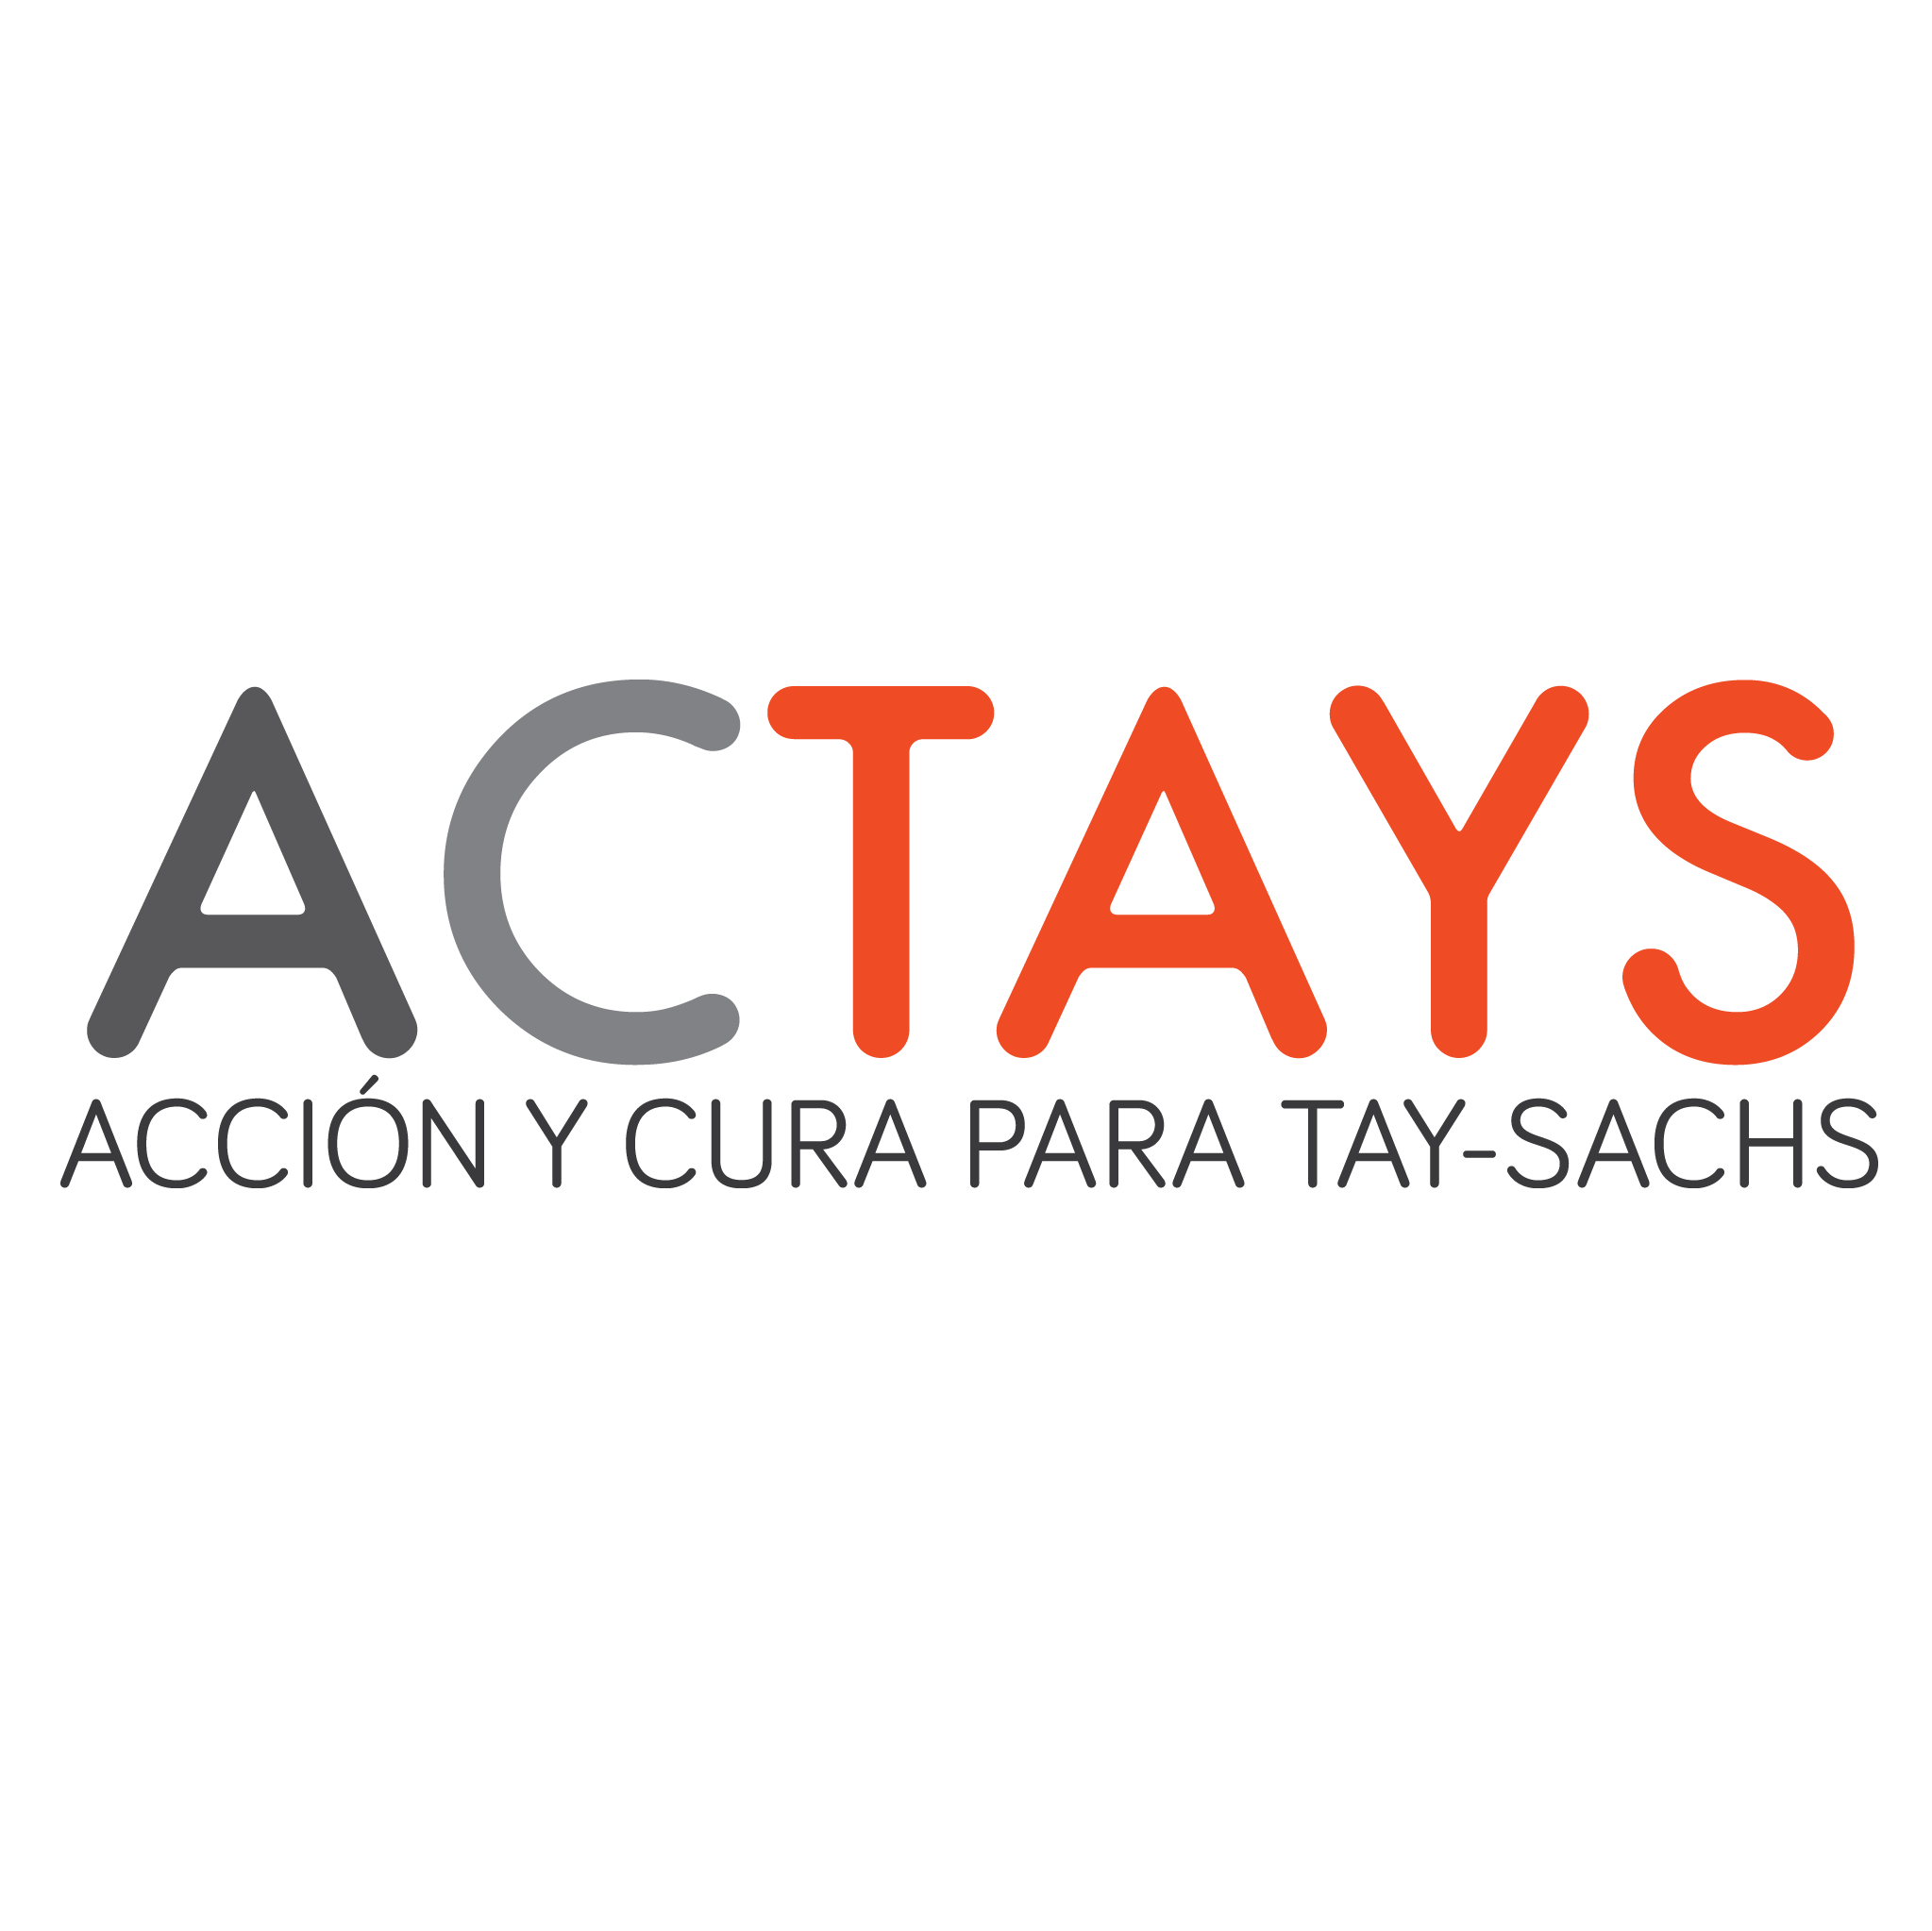 ACTAYS Profile, news, ratings and communication